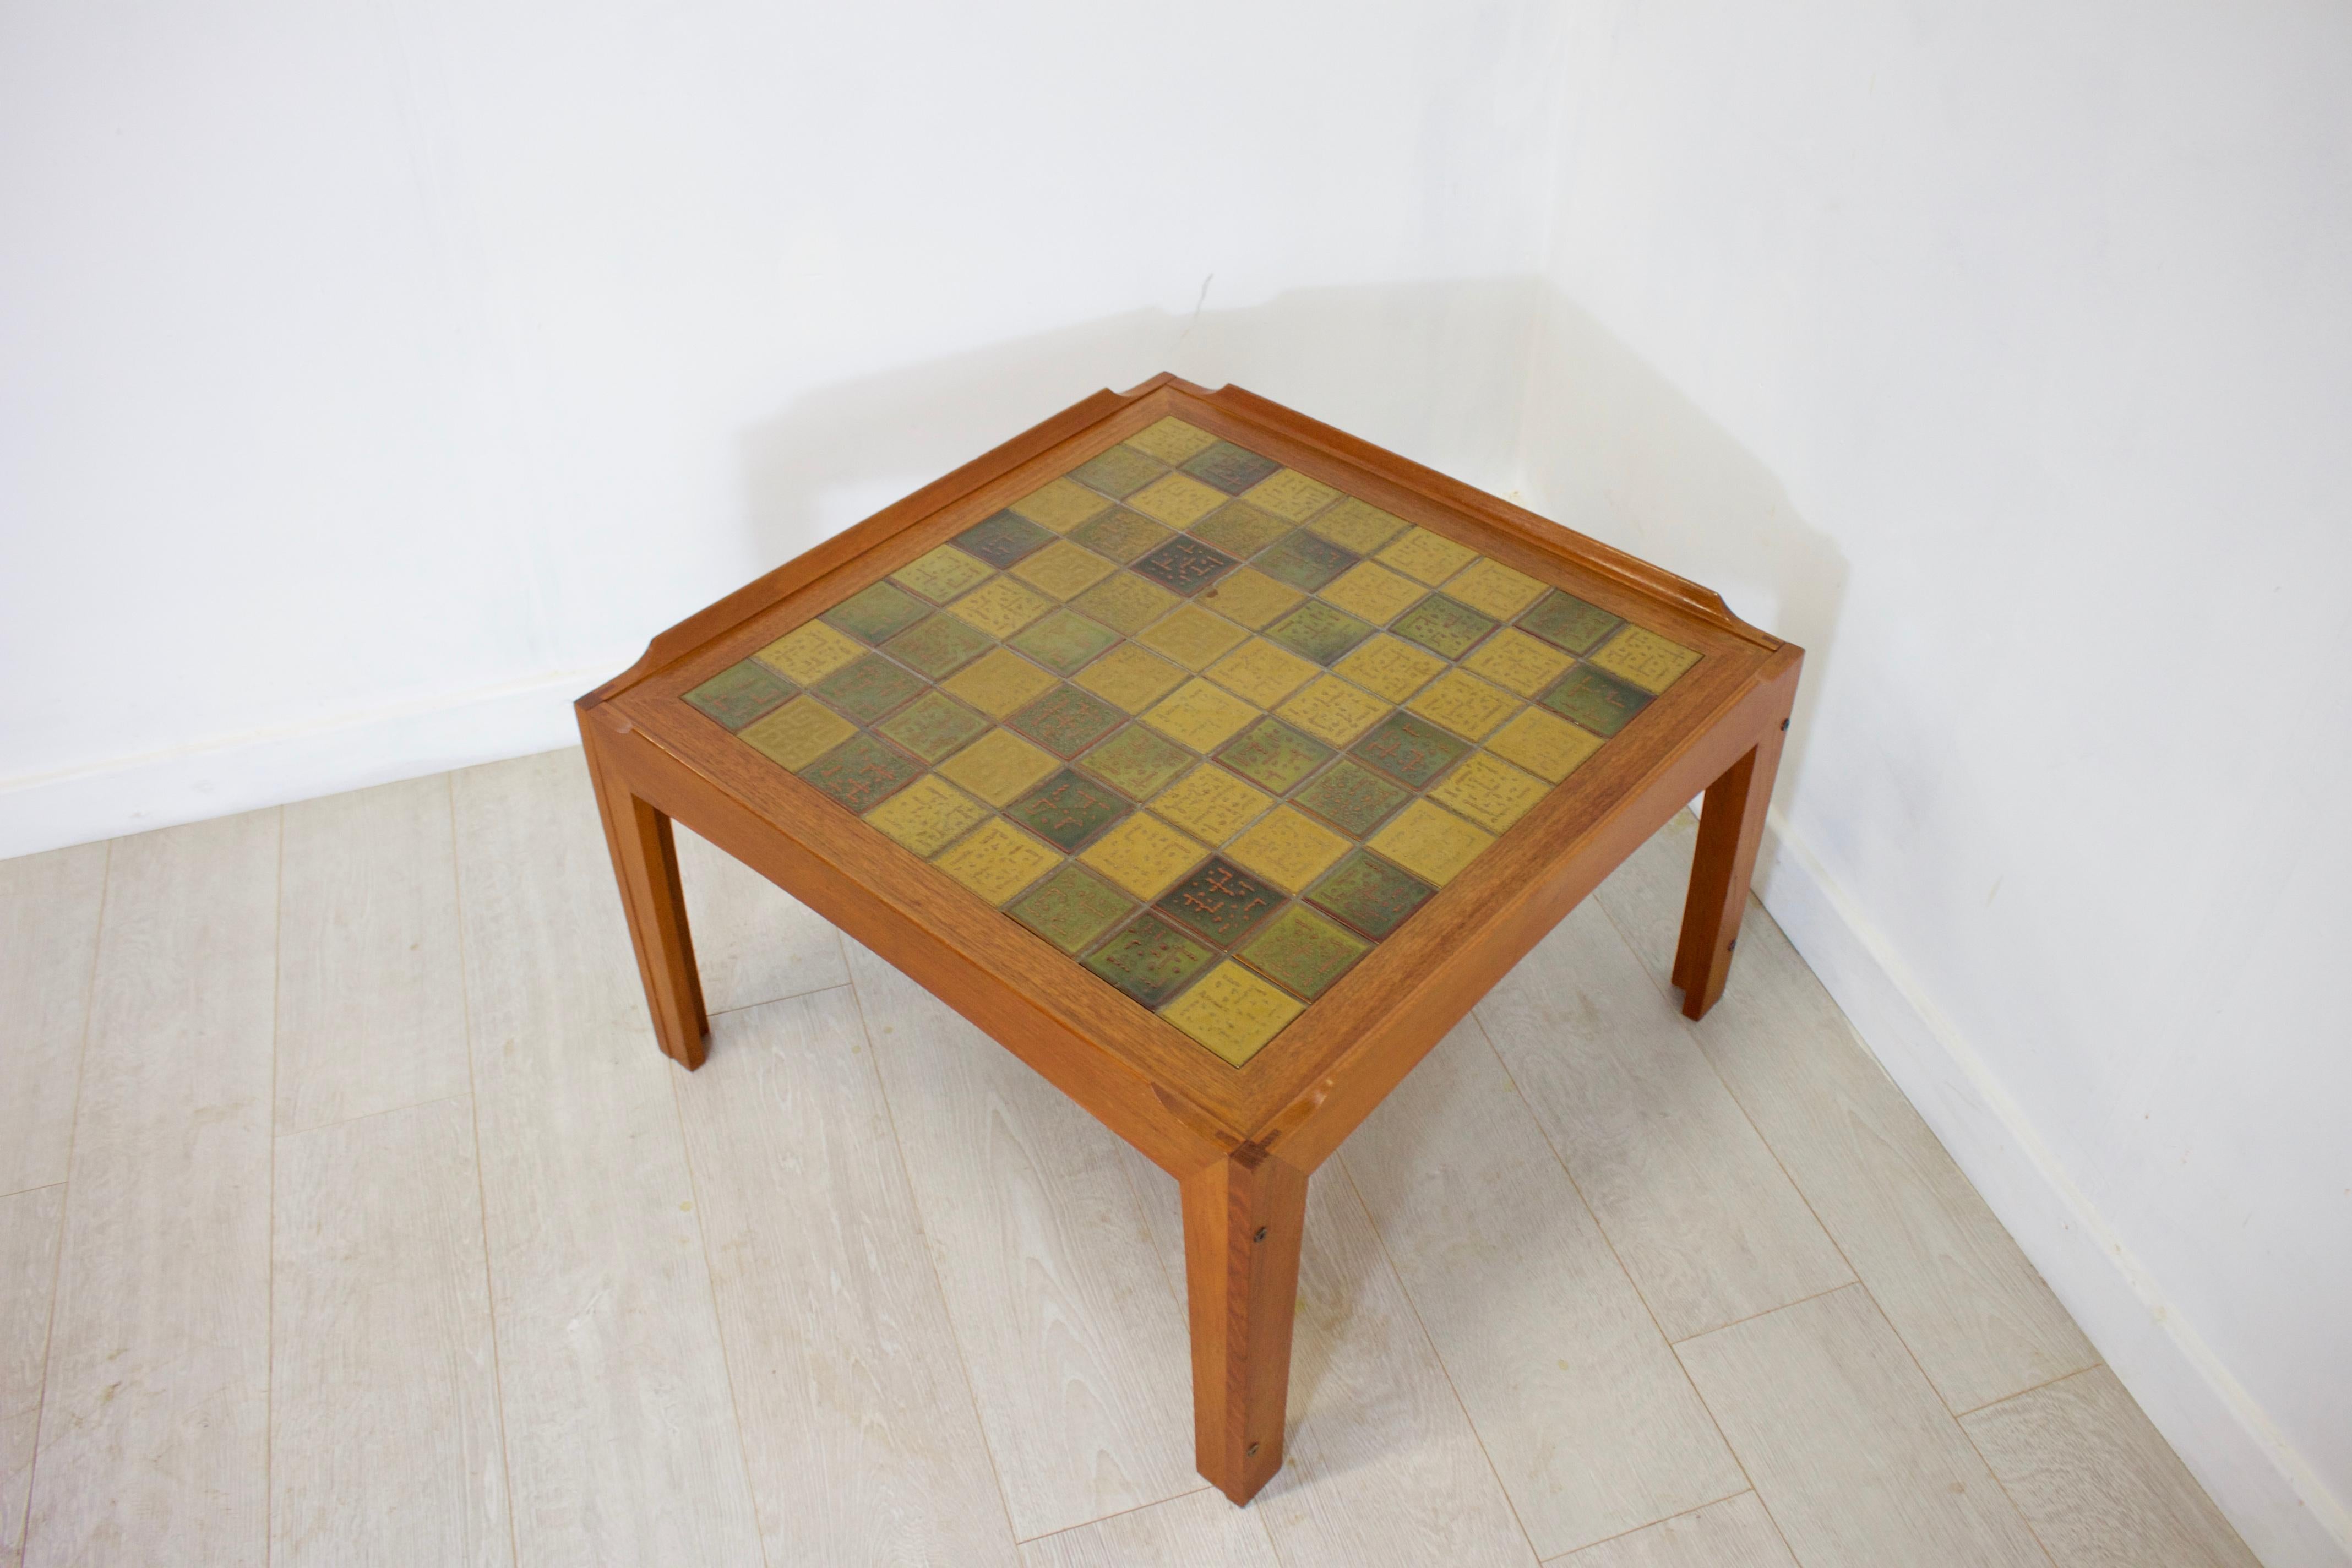 - Midcentury coffee table
- Made by Trioh in Denmark
- Made from teak and tiles.